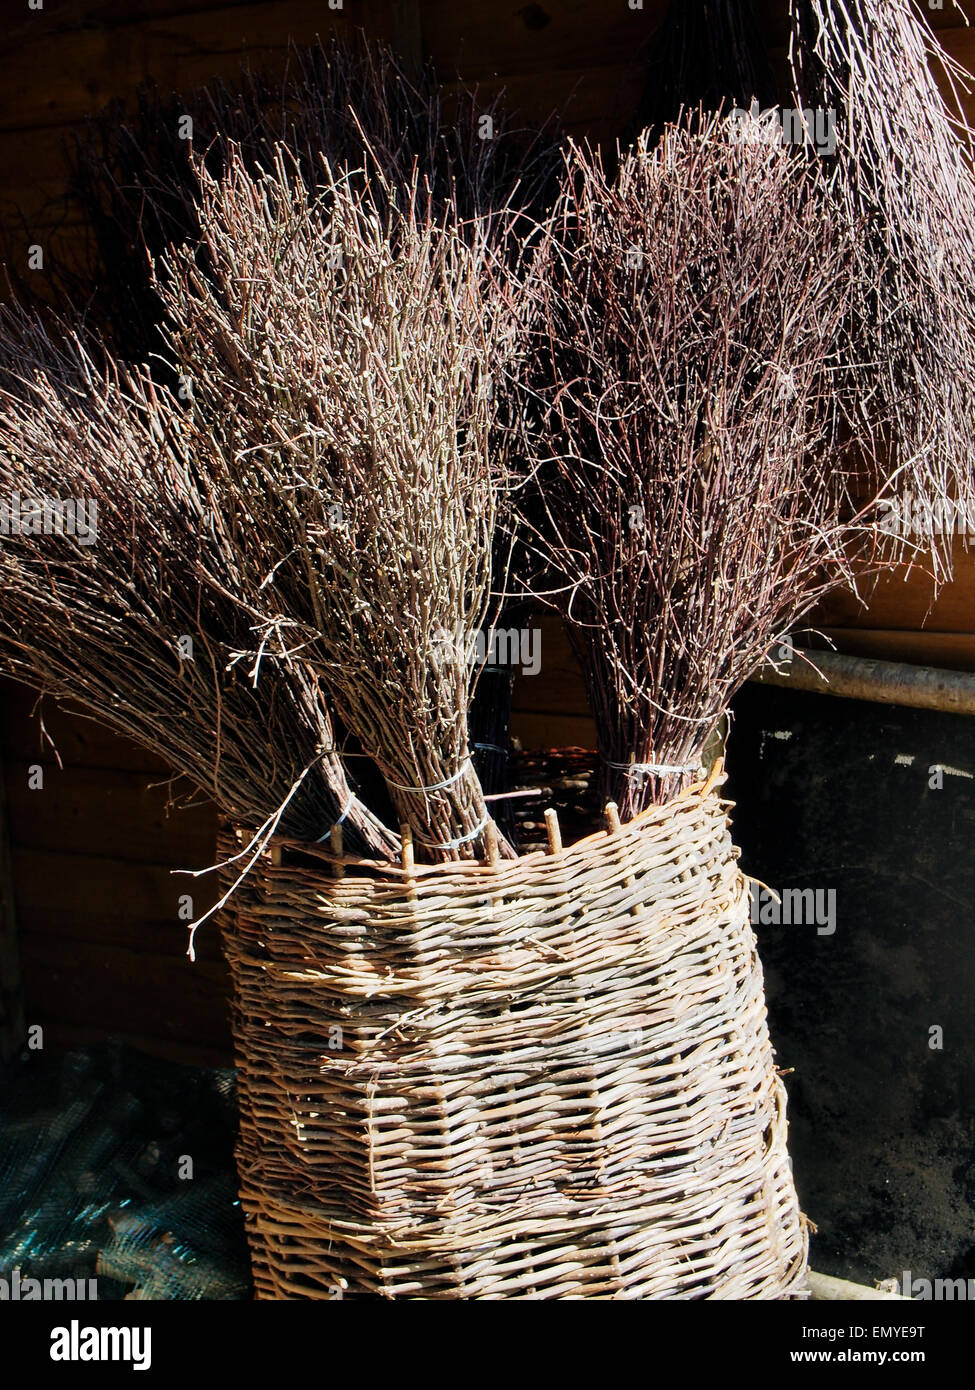 Besom brooms made from birch twigs and sometimes called witches brooms seen standing in a wicker basket on a sales stand. Stock Photo